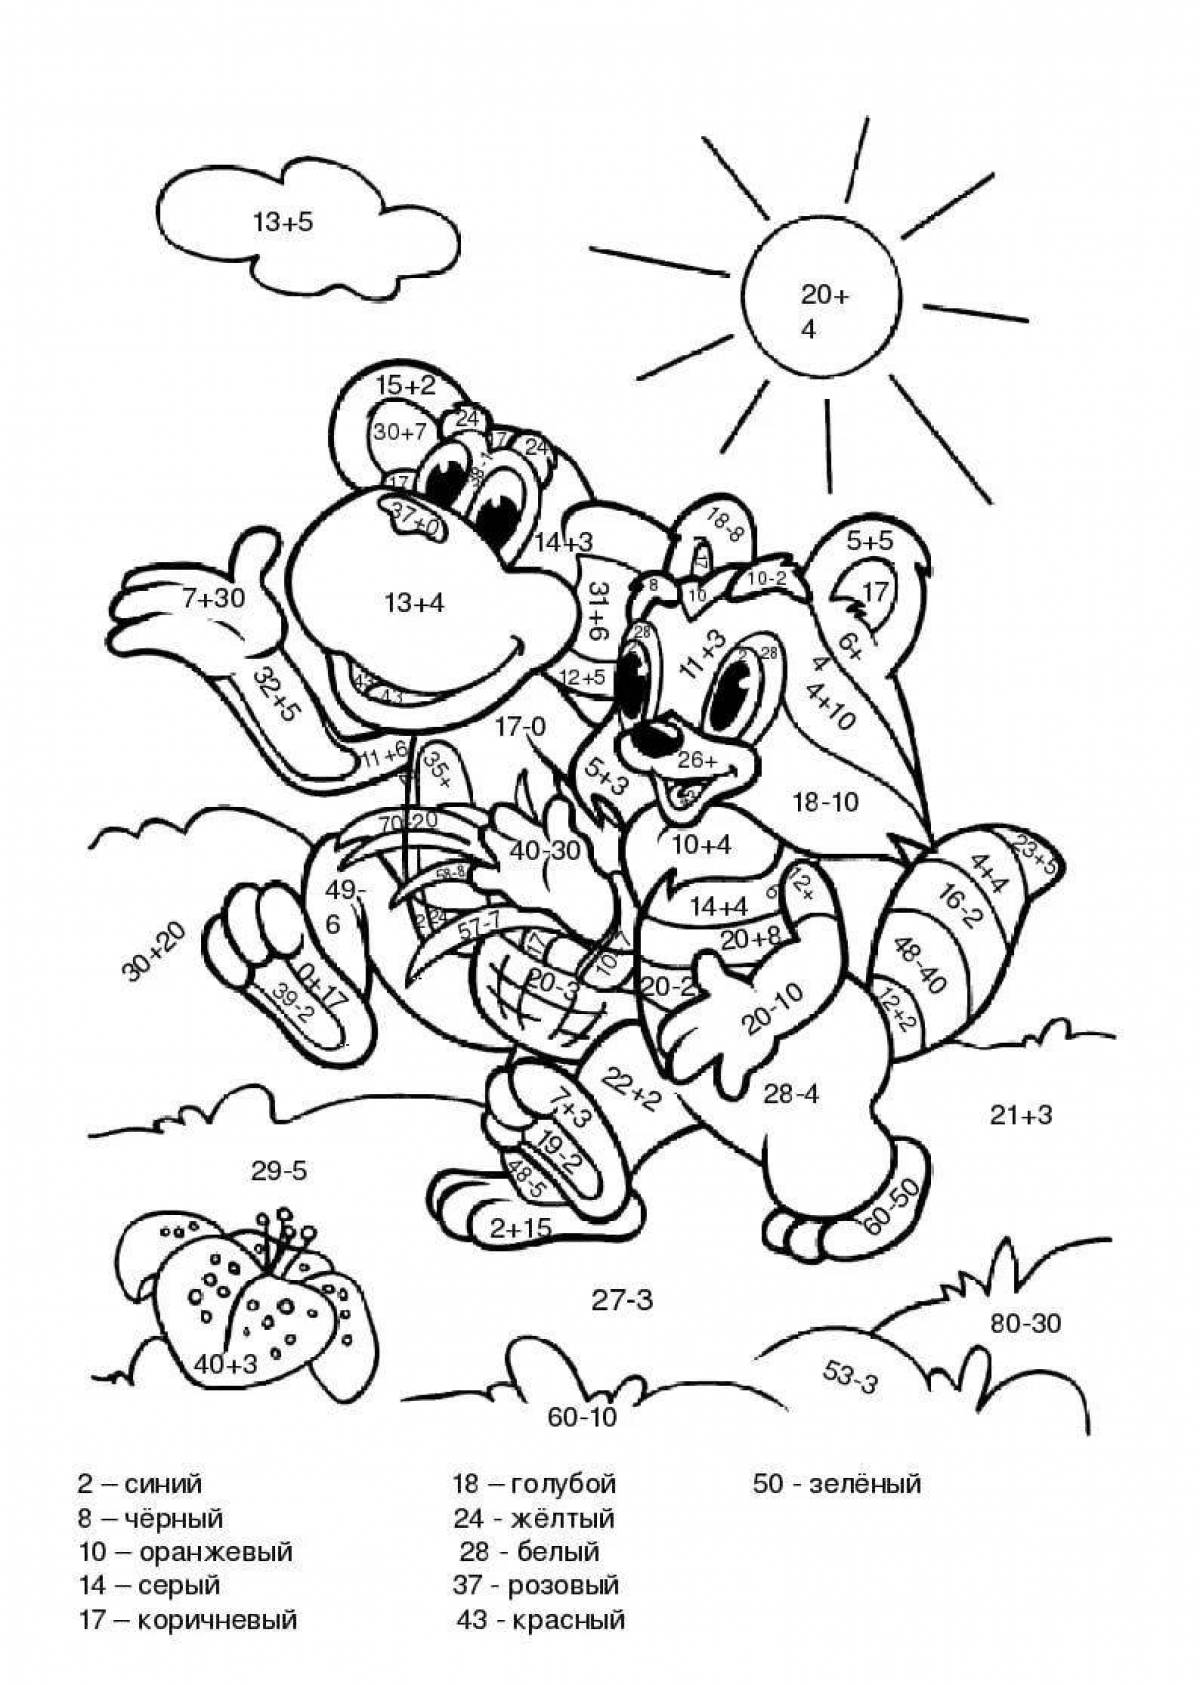 High color score on coloring page 100